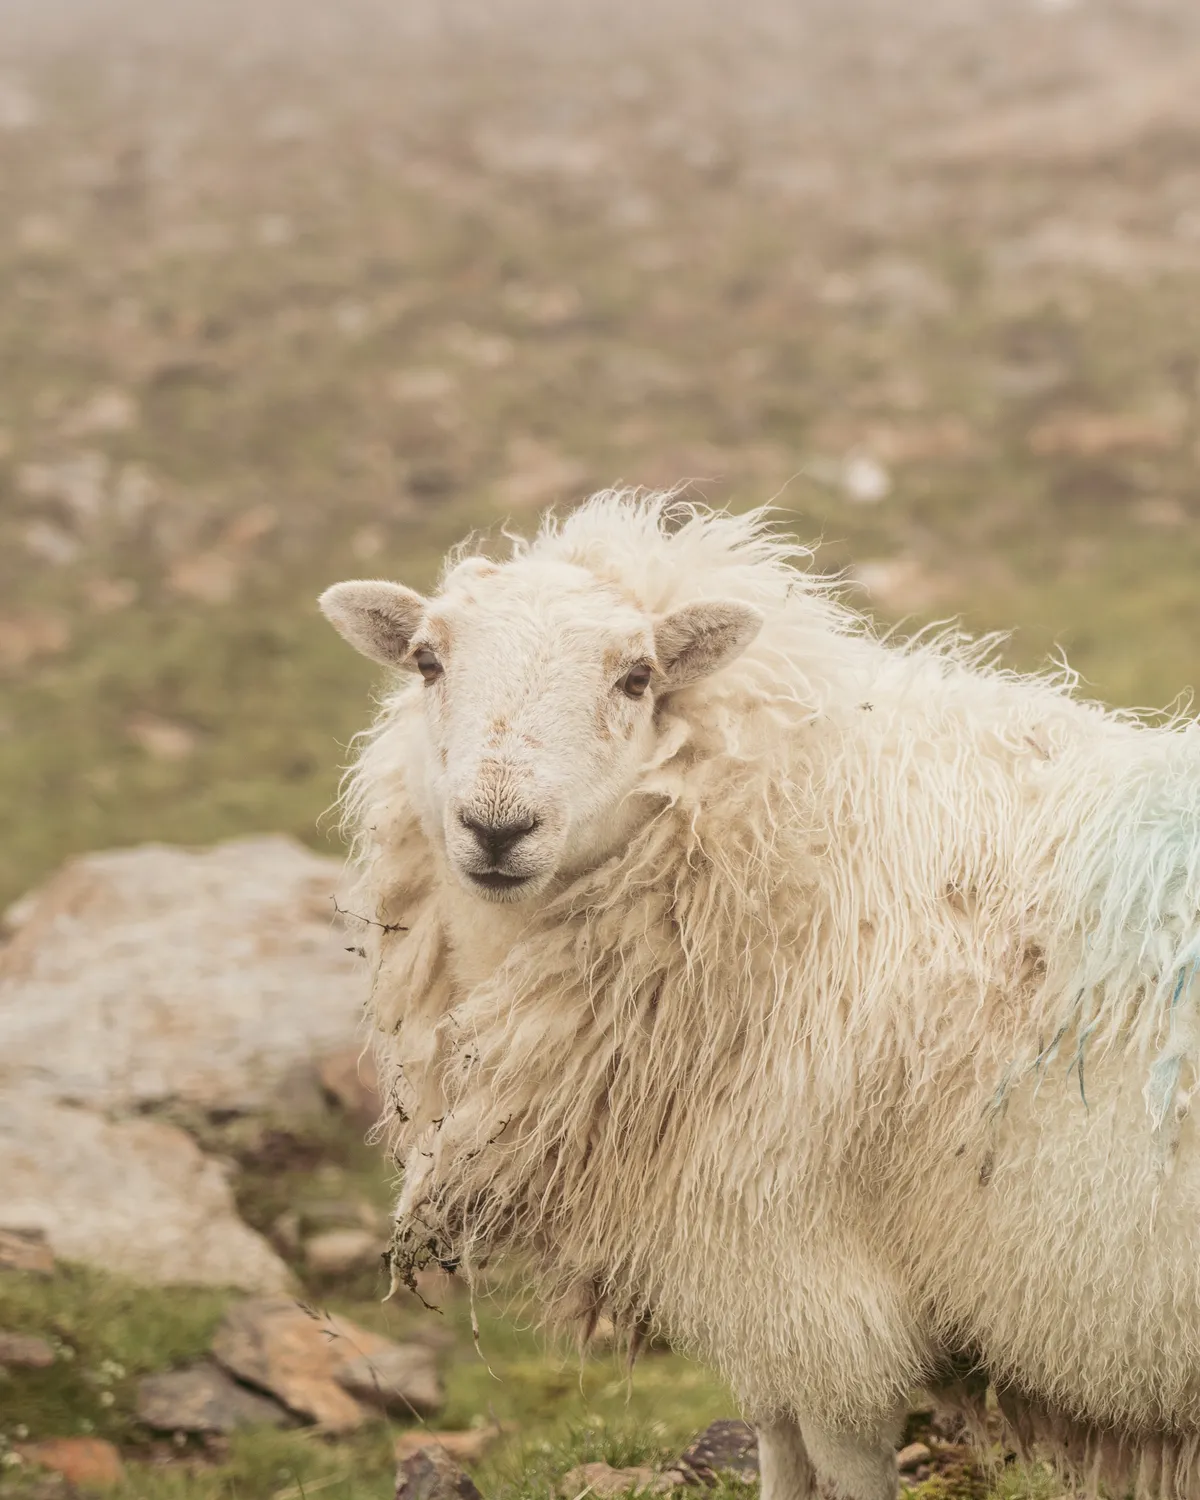 A long-haired Welsh Mountain sheep in the wilderness